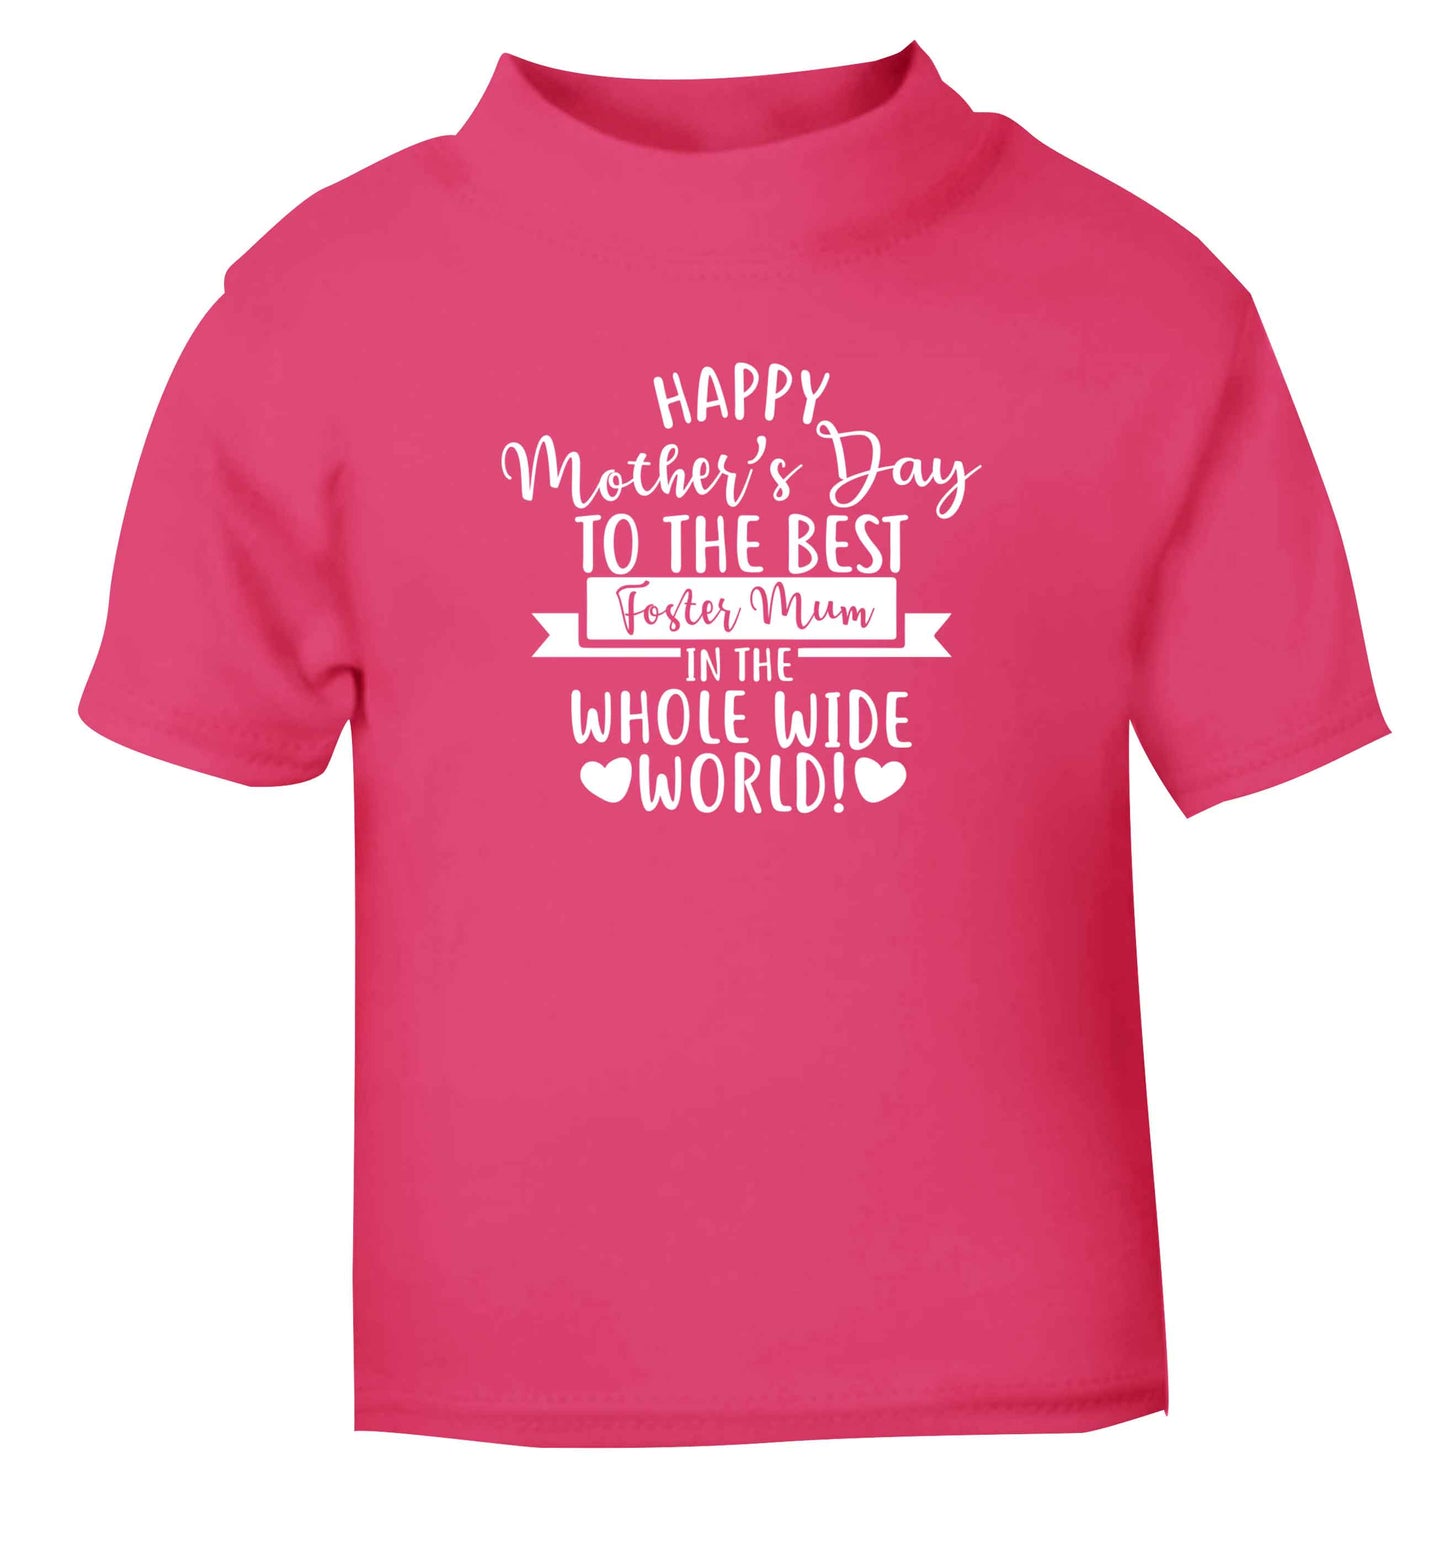 Happy mother's day to the best foster mum in the world pink baby toddler Tshirt 2 Years